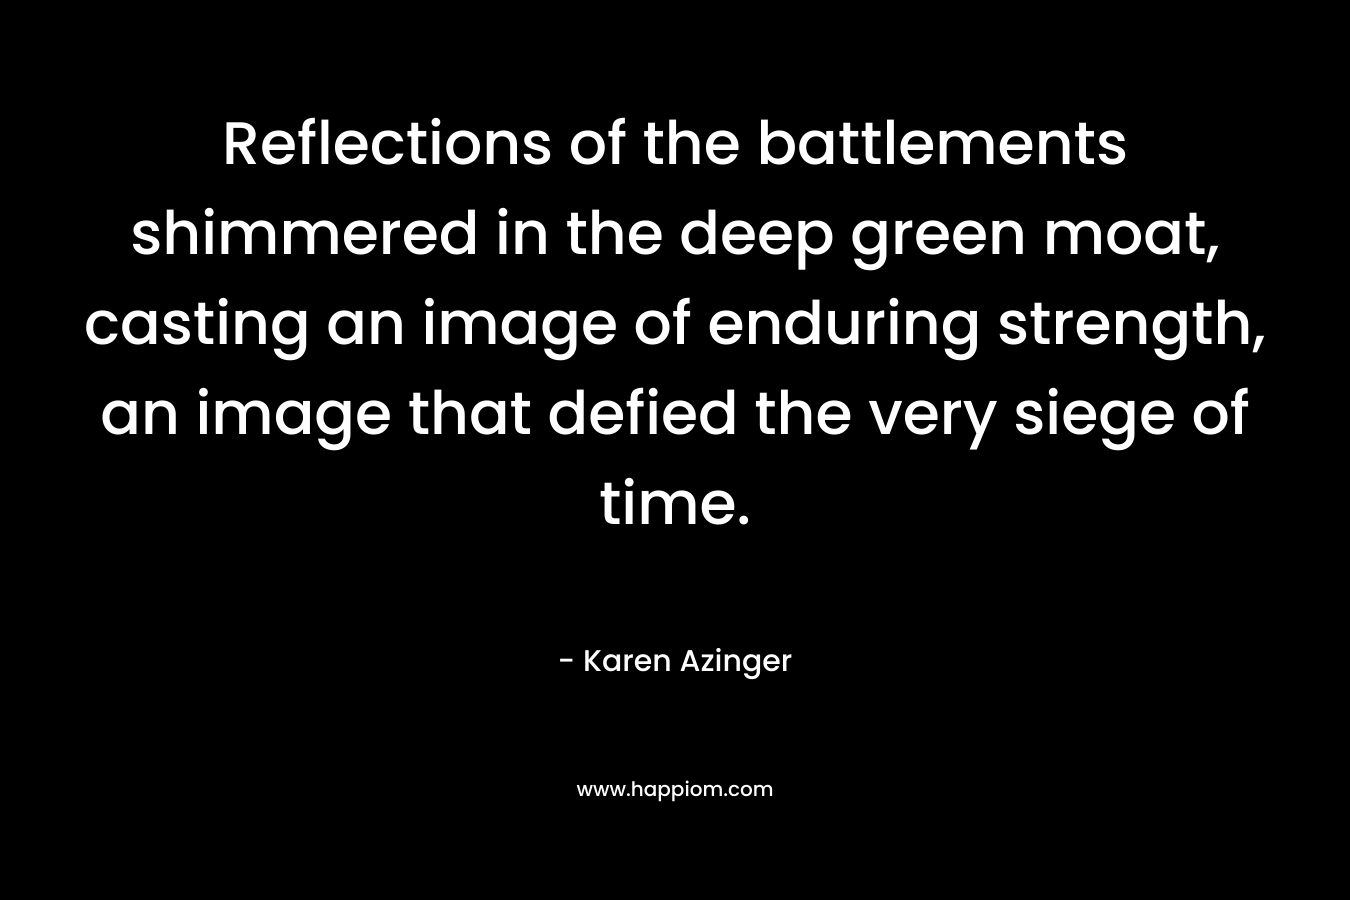 Reflections of the battlements shimmered in the deep green moat, casting an image of enduring strength, an image that defied the very siege of time. – Karen Azinger